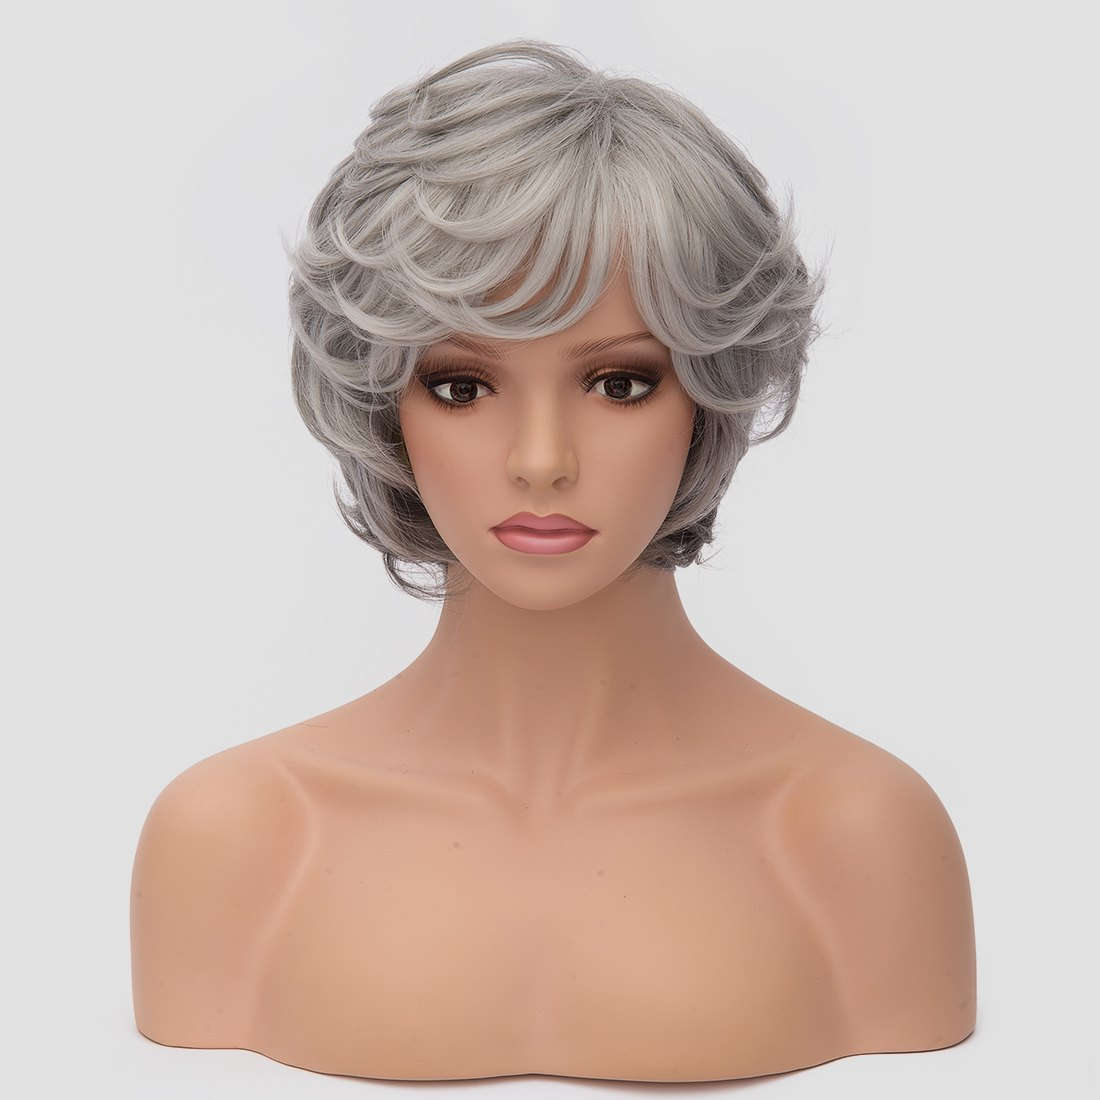 Towheaded Fashion Silver White Mixed Gray Side Bang Short Capless Synthetic Curly Women's Wig